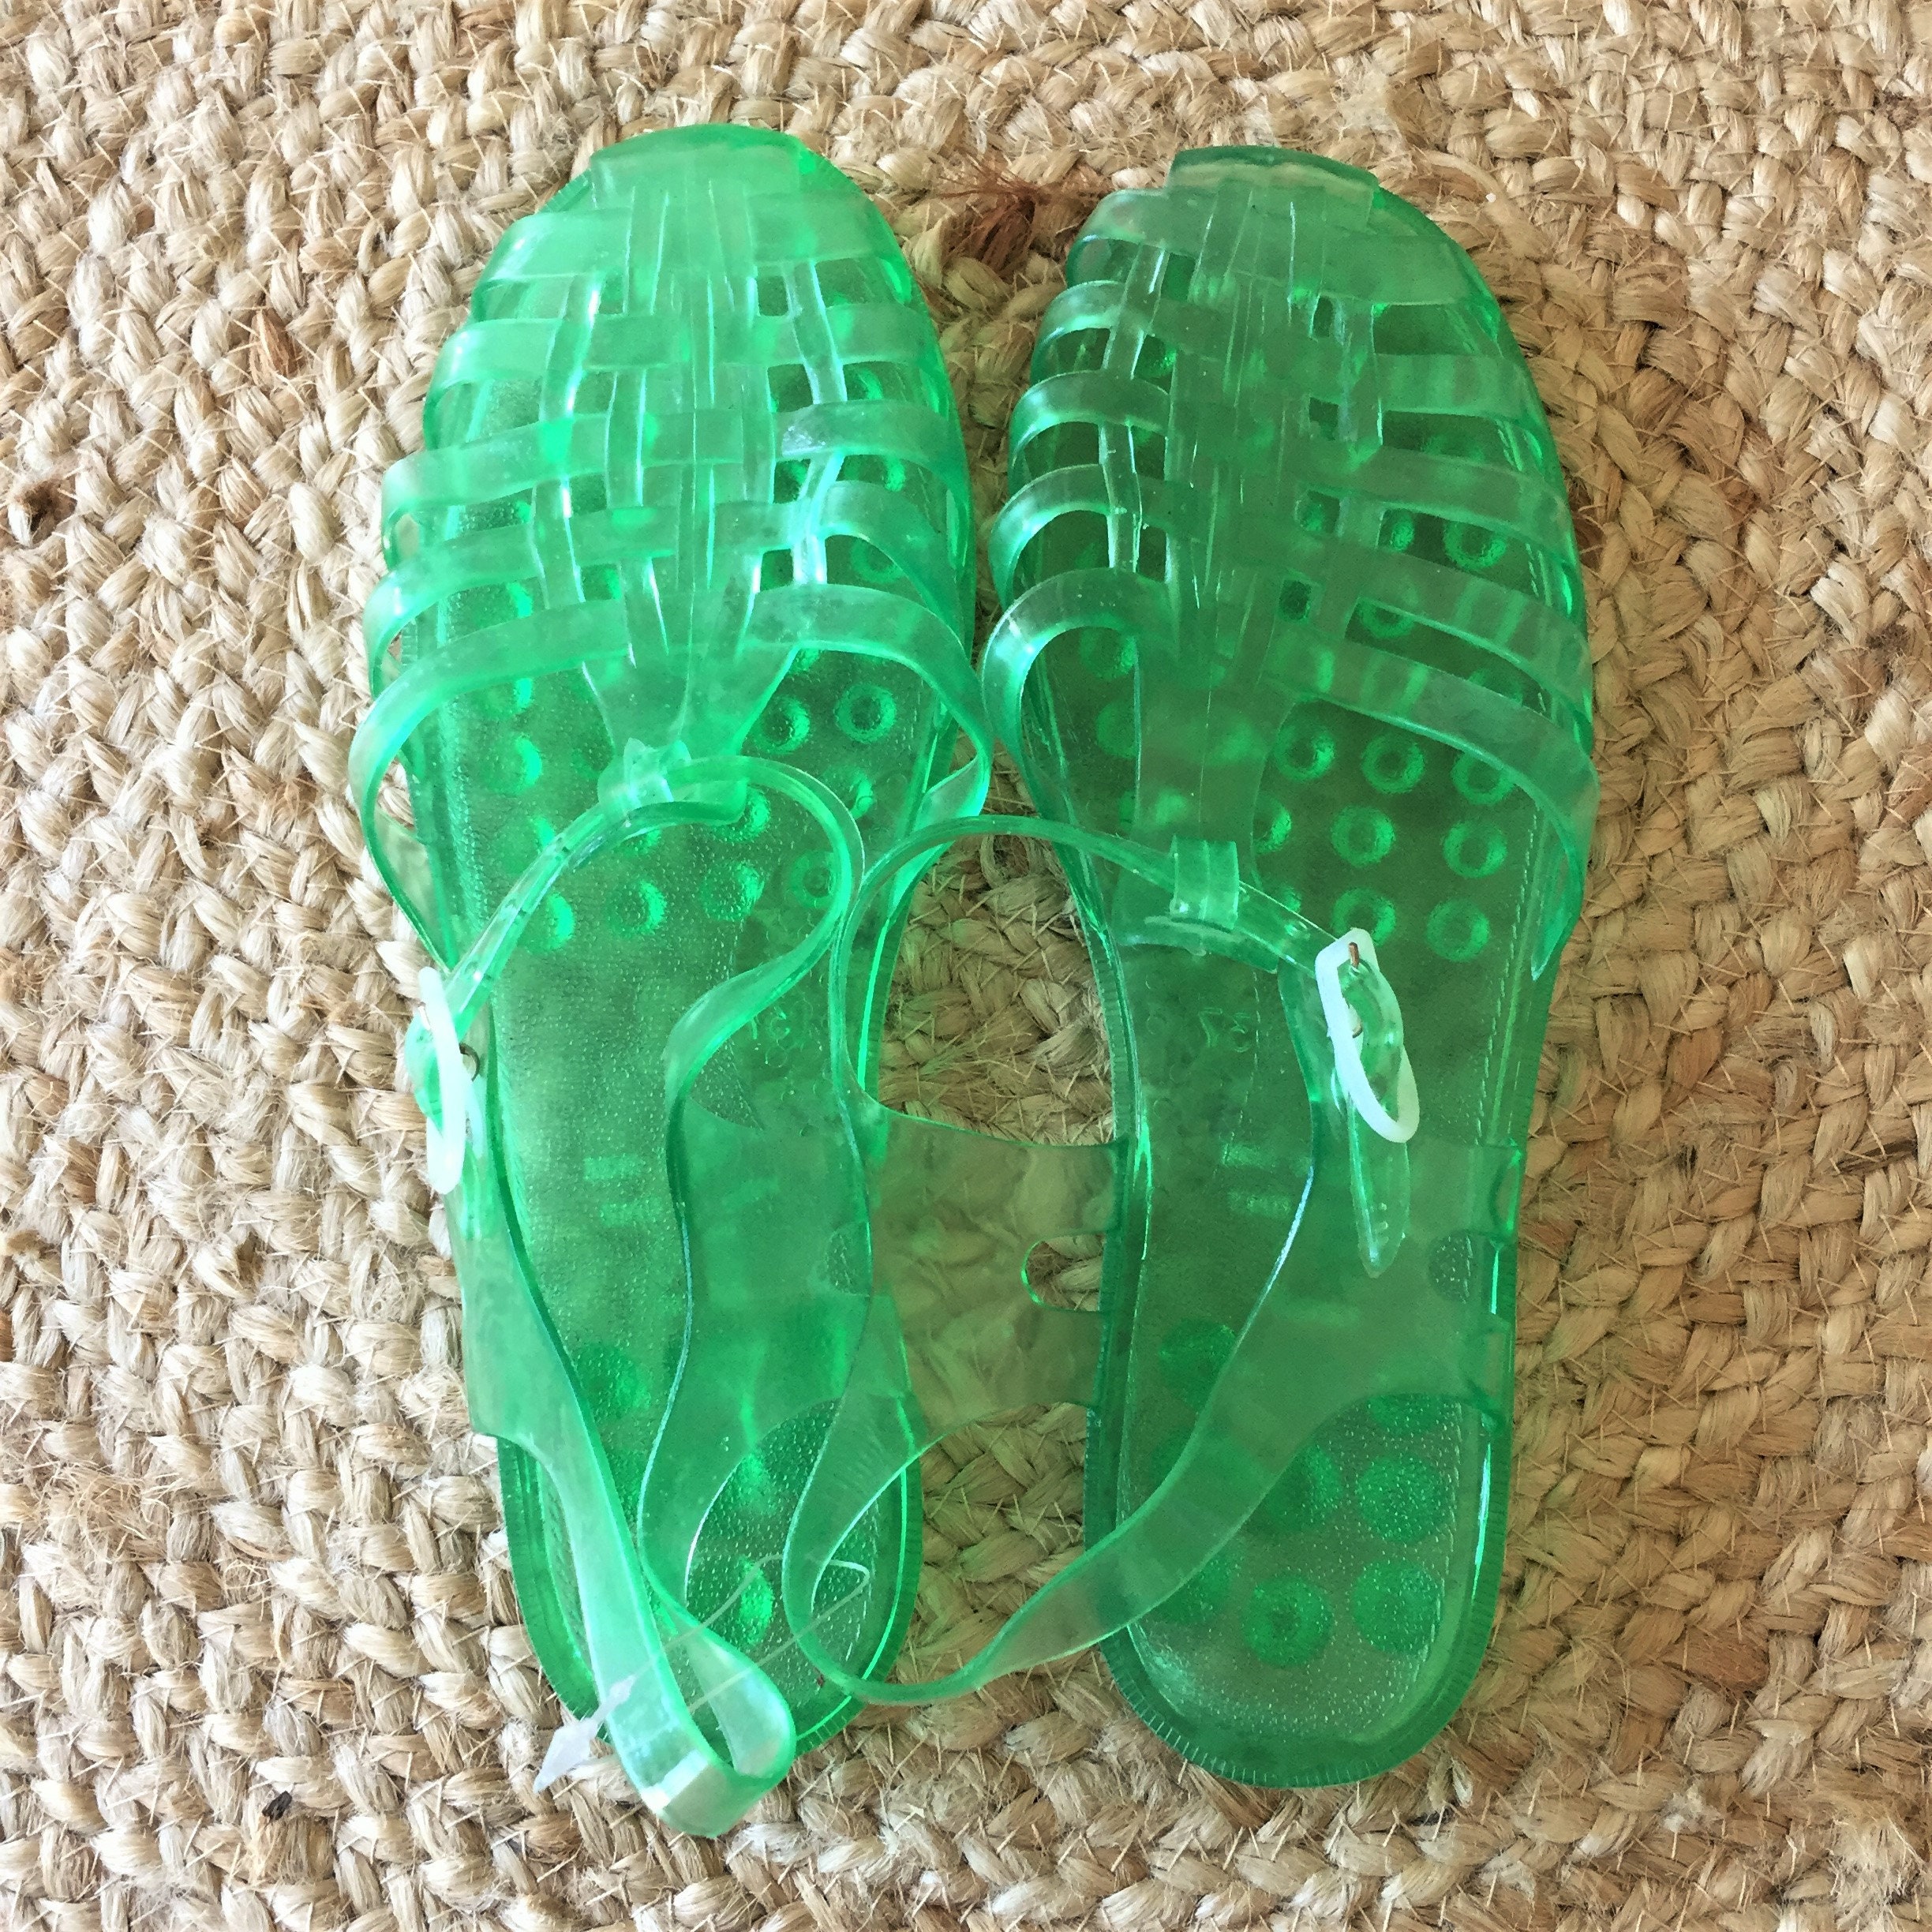 Buy 80s Jelly Sandals Online In India -  India